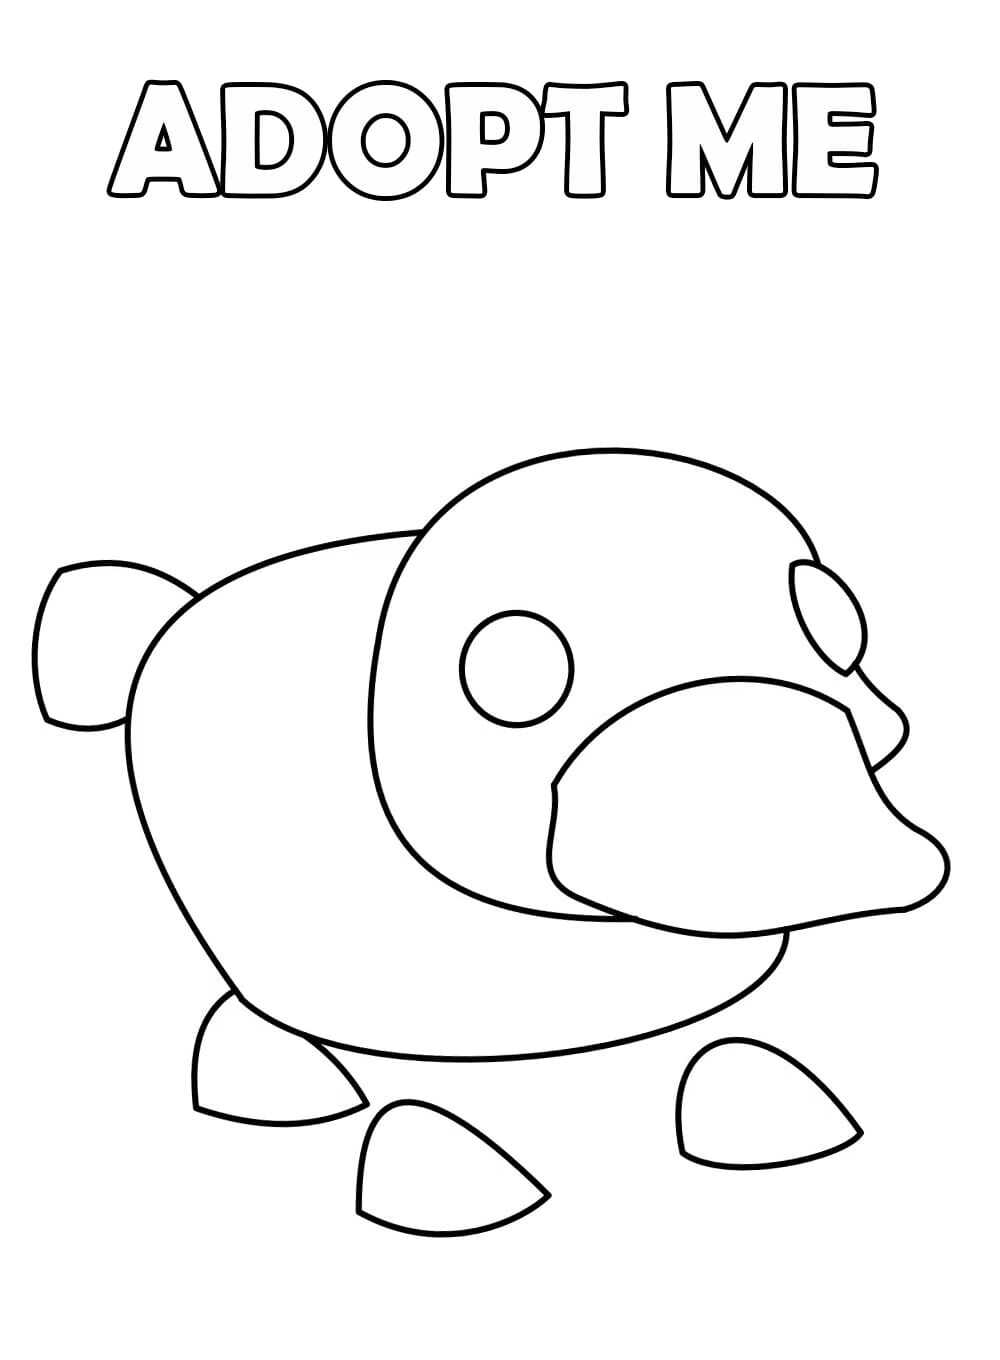 The Platypus In Adopt Me Has Floppy Feet And A Flat, Wide Tail Coloring Pages